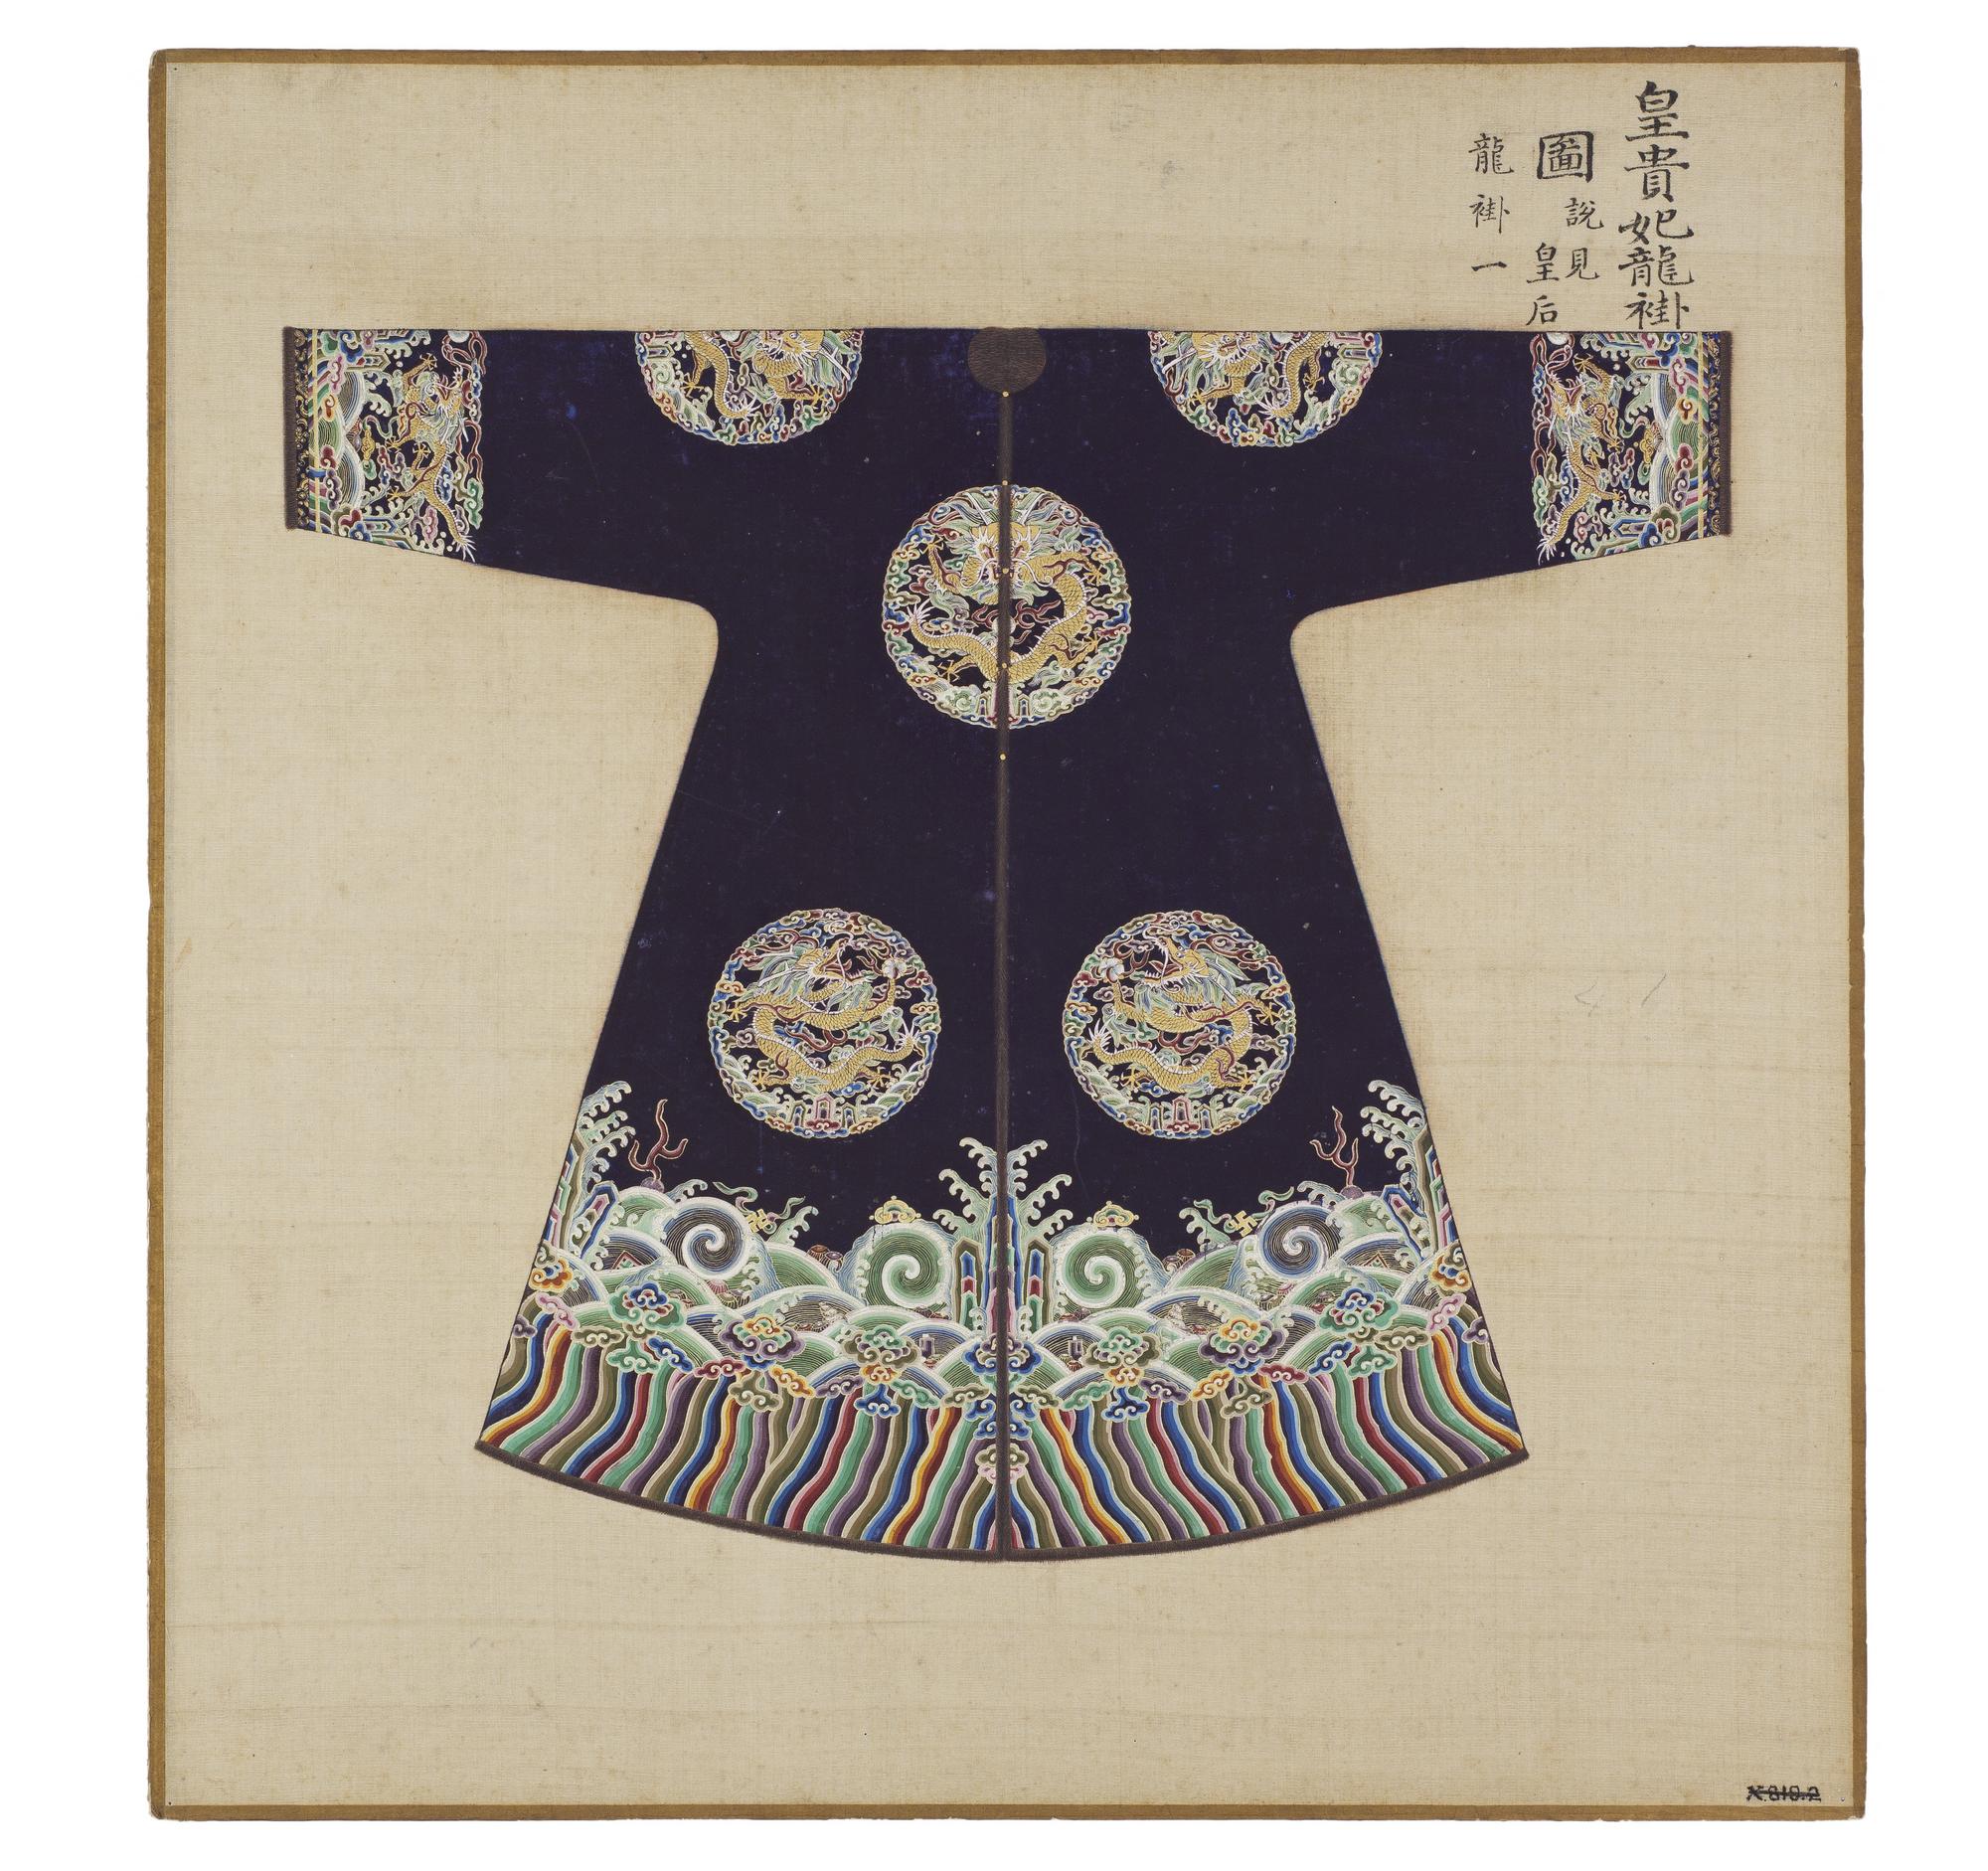 Painting on silk, Illustration of a First Rank Imperial Concubine's Dragon Jacket, from the "Huangchao liqi tushi" (Illustrations of Imperial Ritual Paraphernalia): China, Qing dynasty, c. 1760-1766.